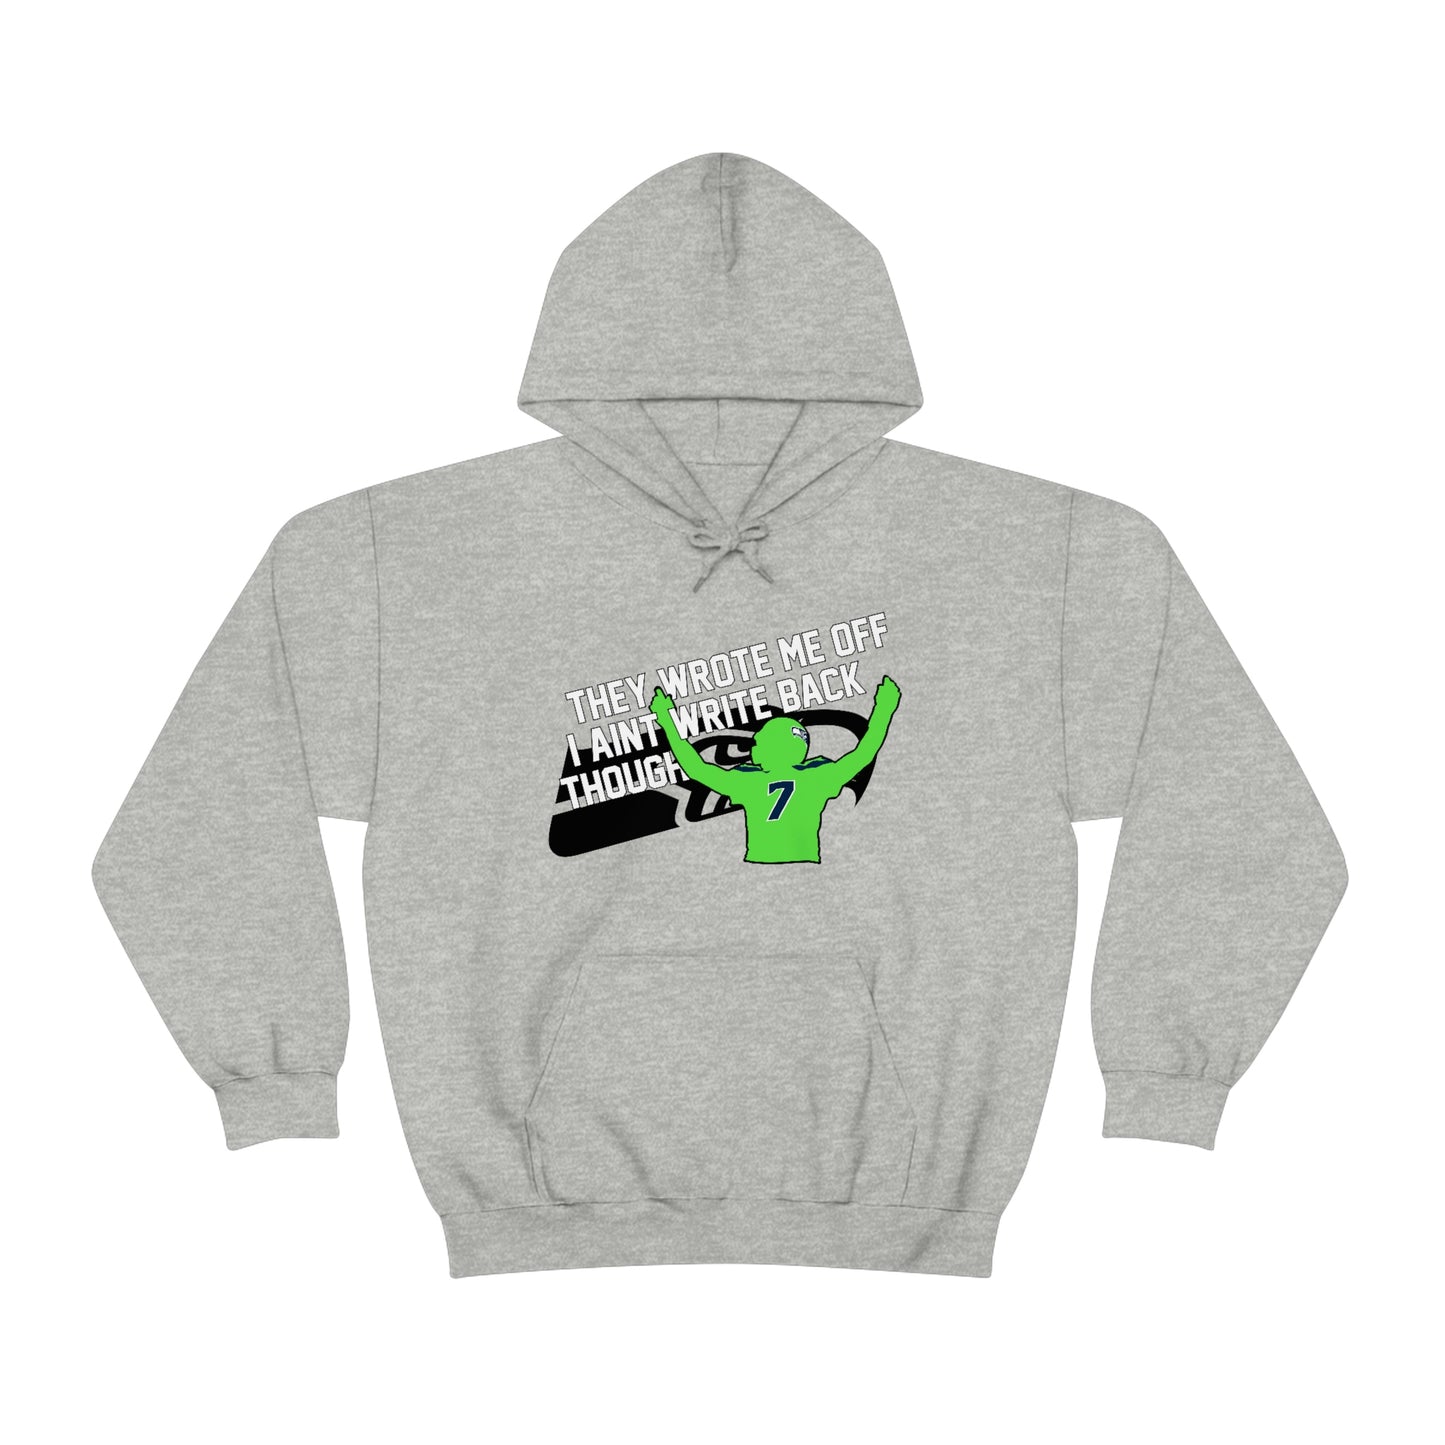 Geno Smith "They Wrote Me Off" Seattle Seahawks Hoodie